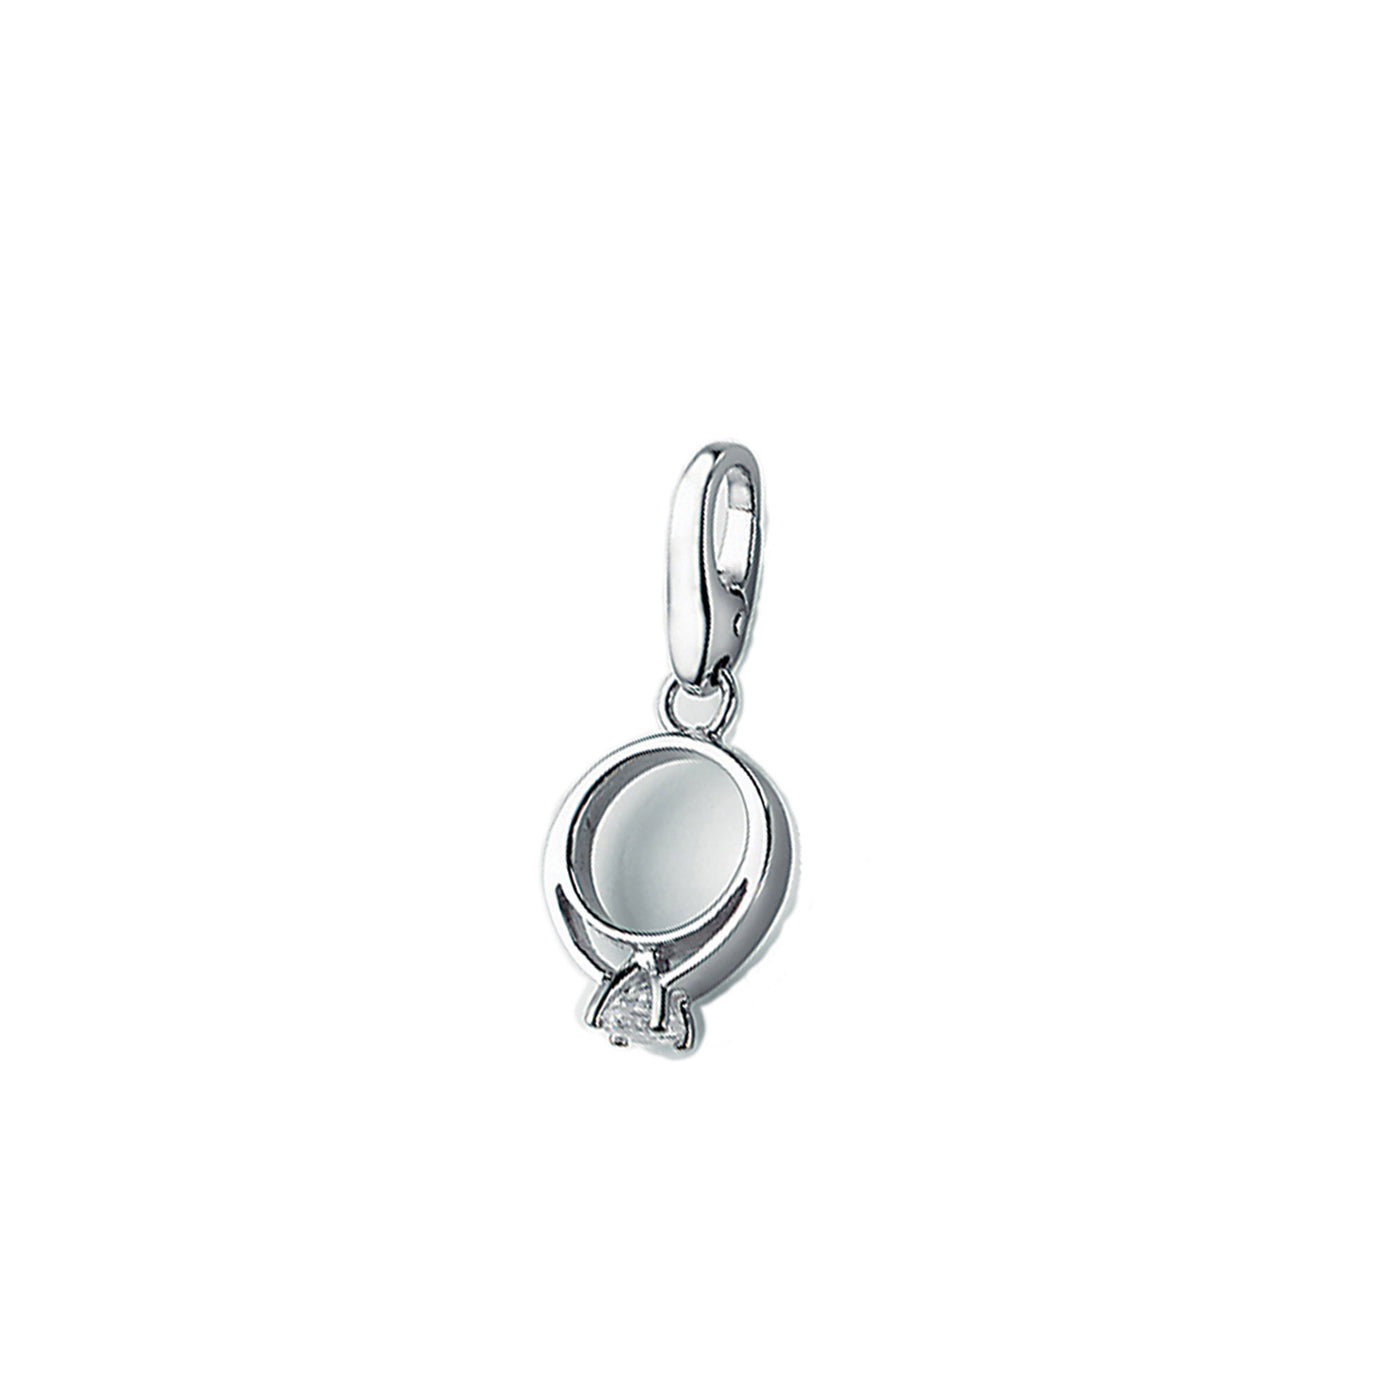 Rebecca Sloane Sterling Silver Engagement Ring Charm